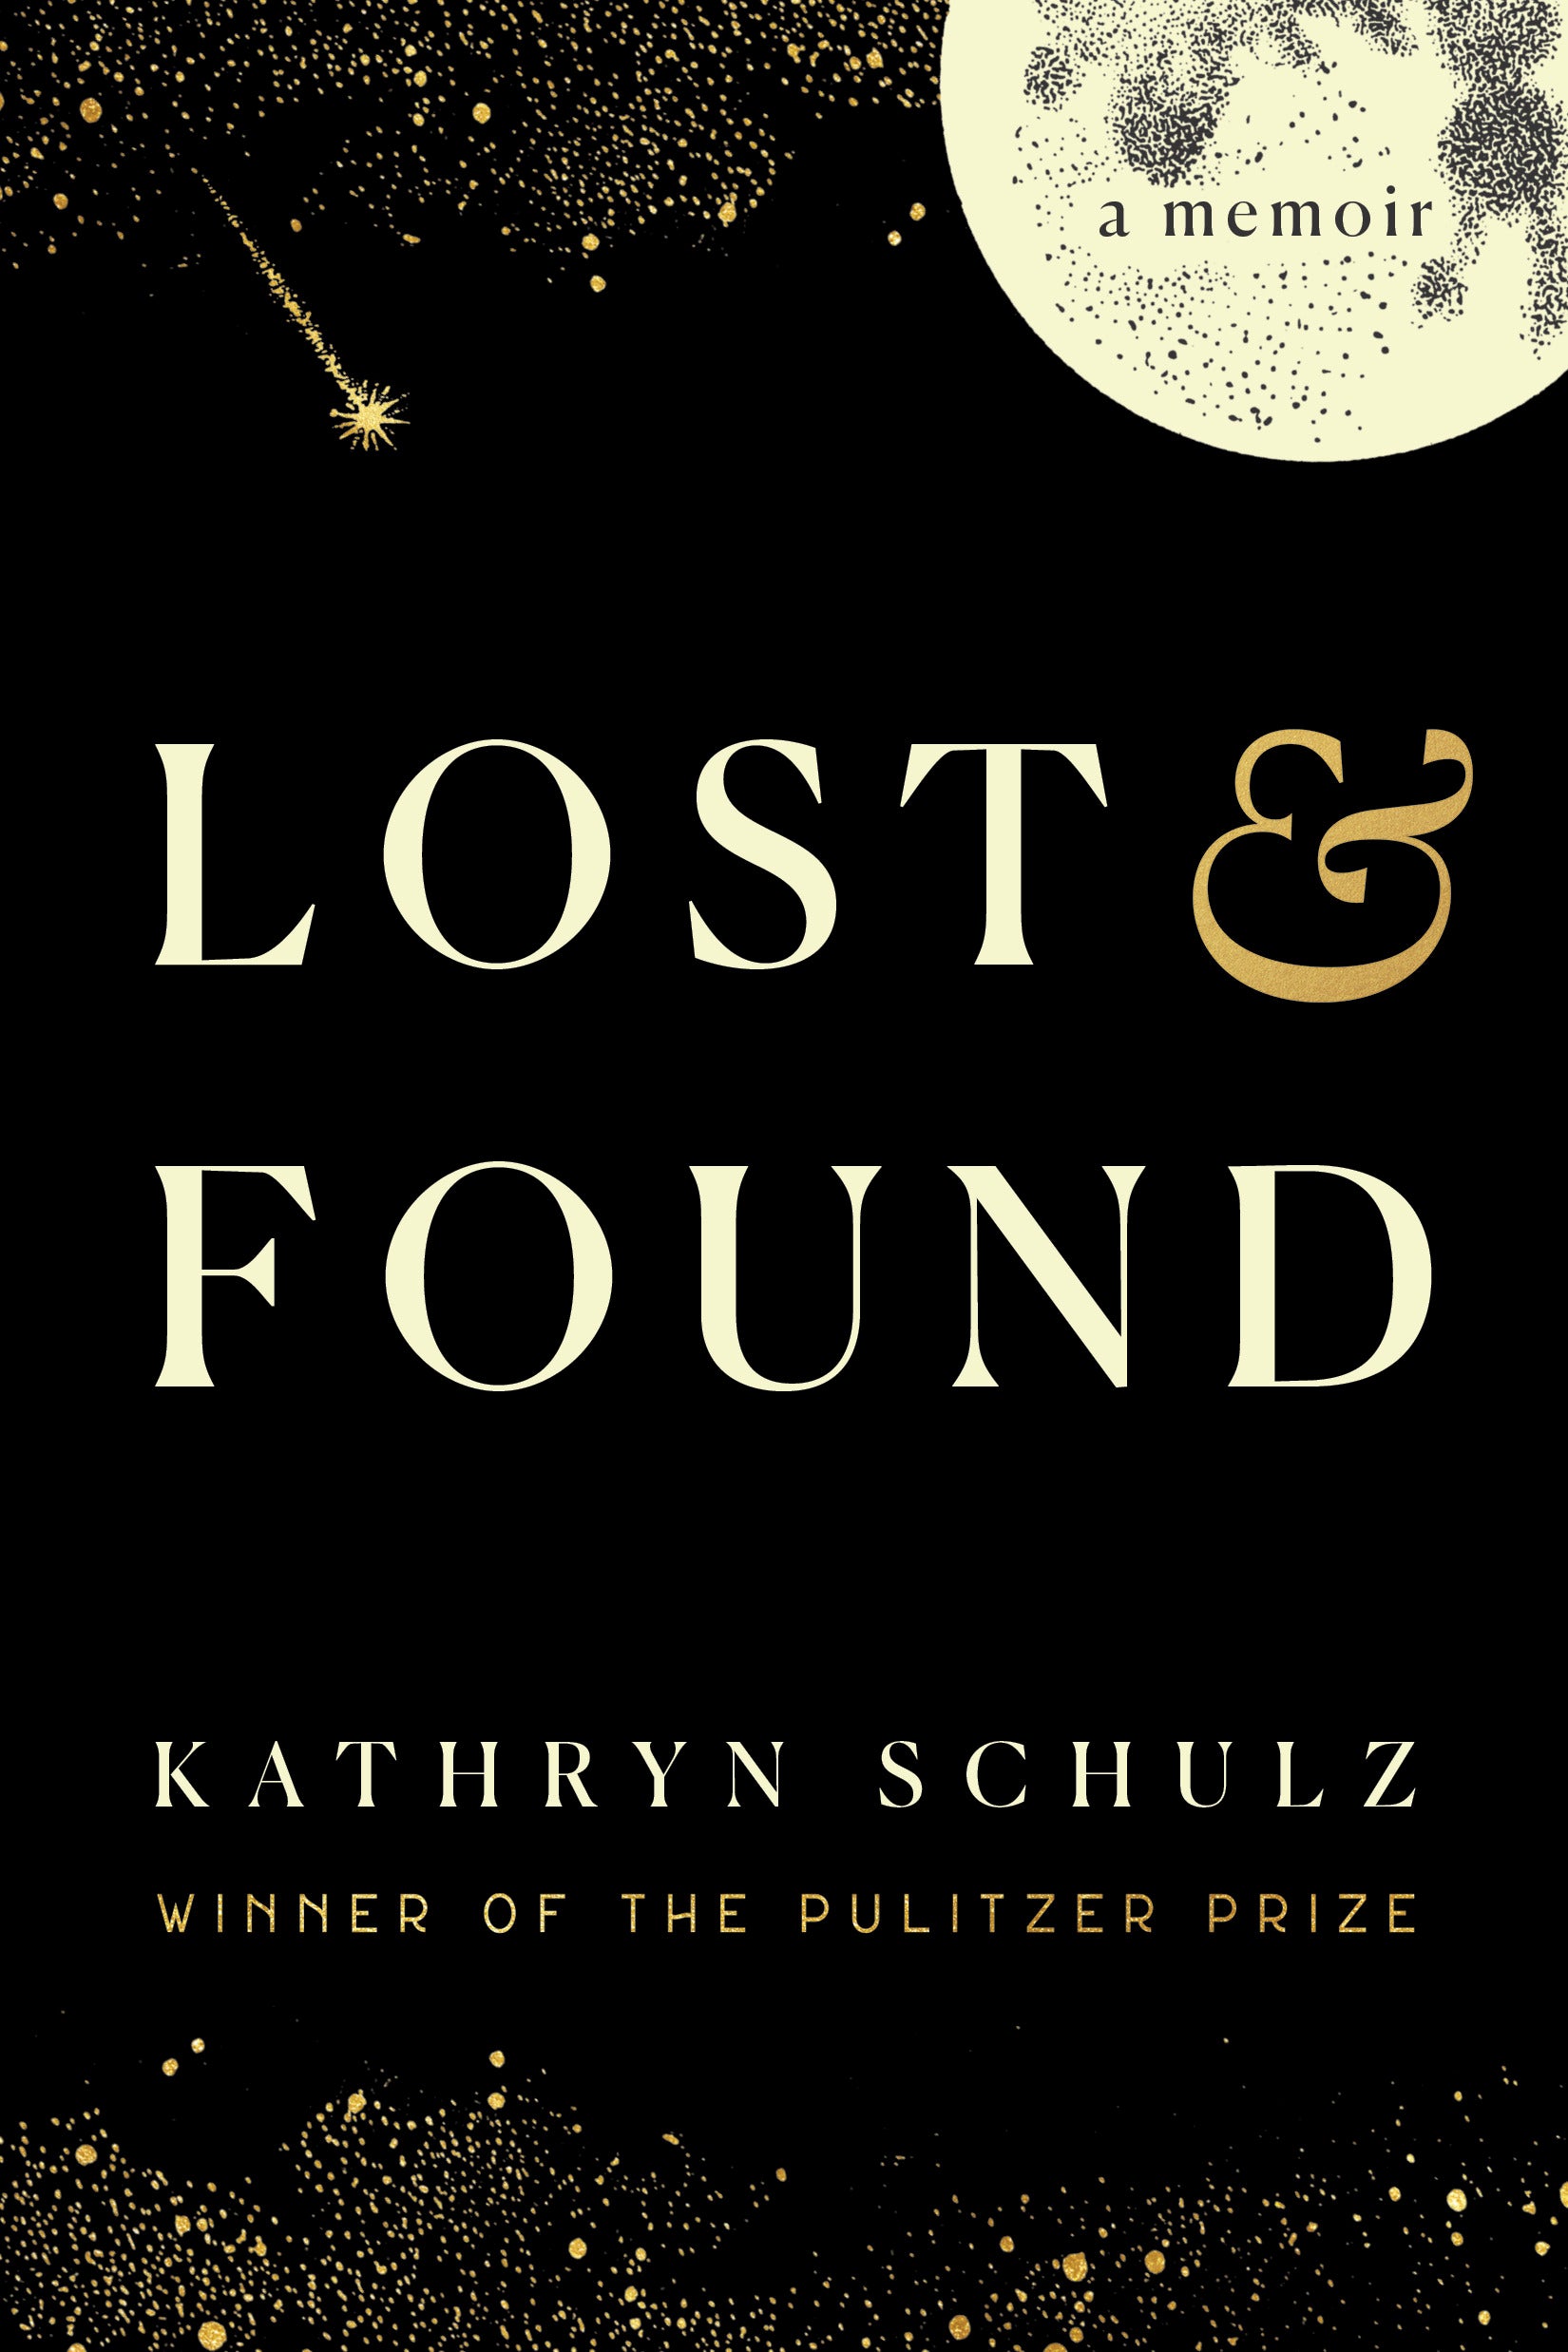 Book Review - Lost & Found